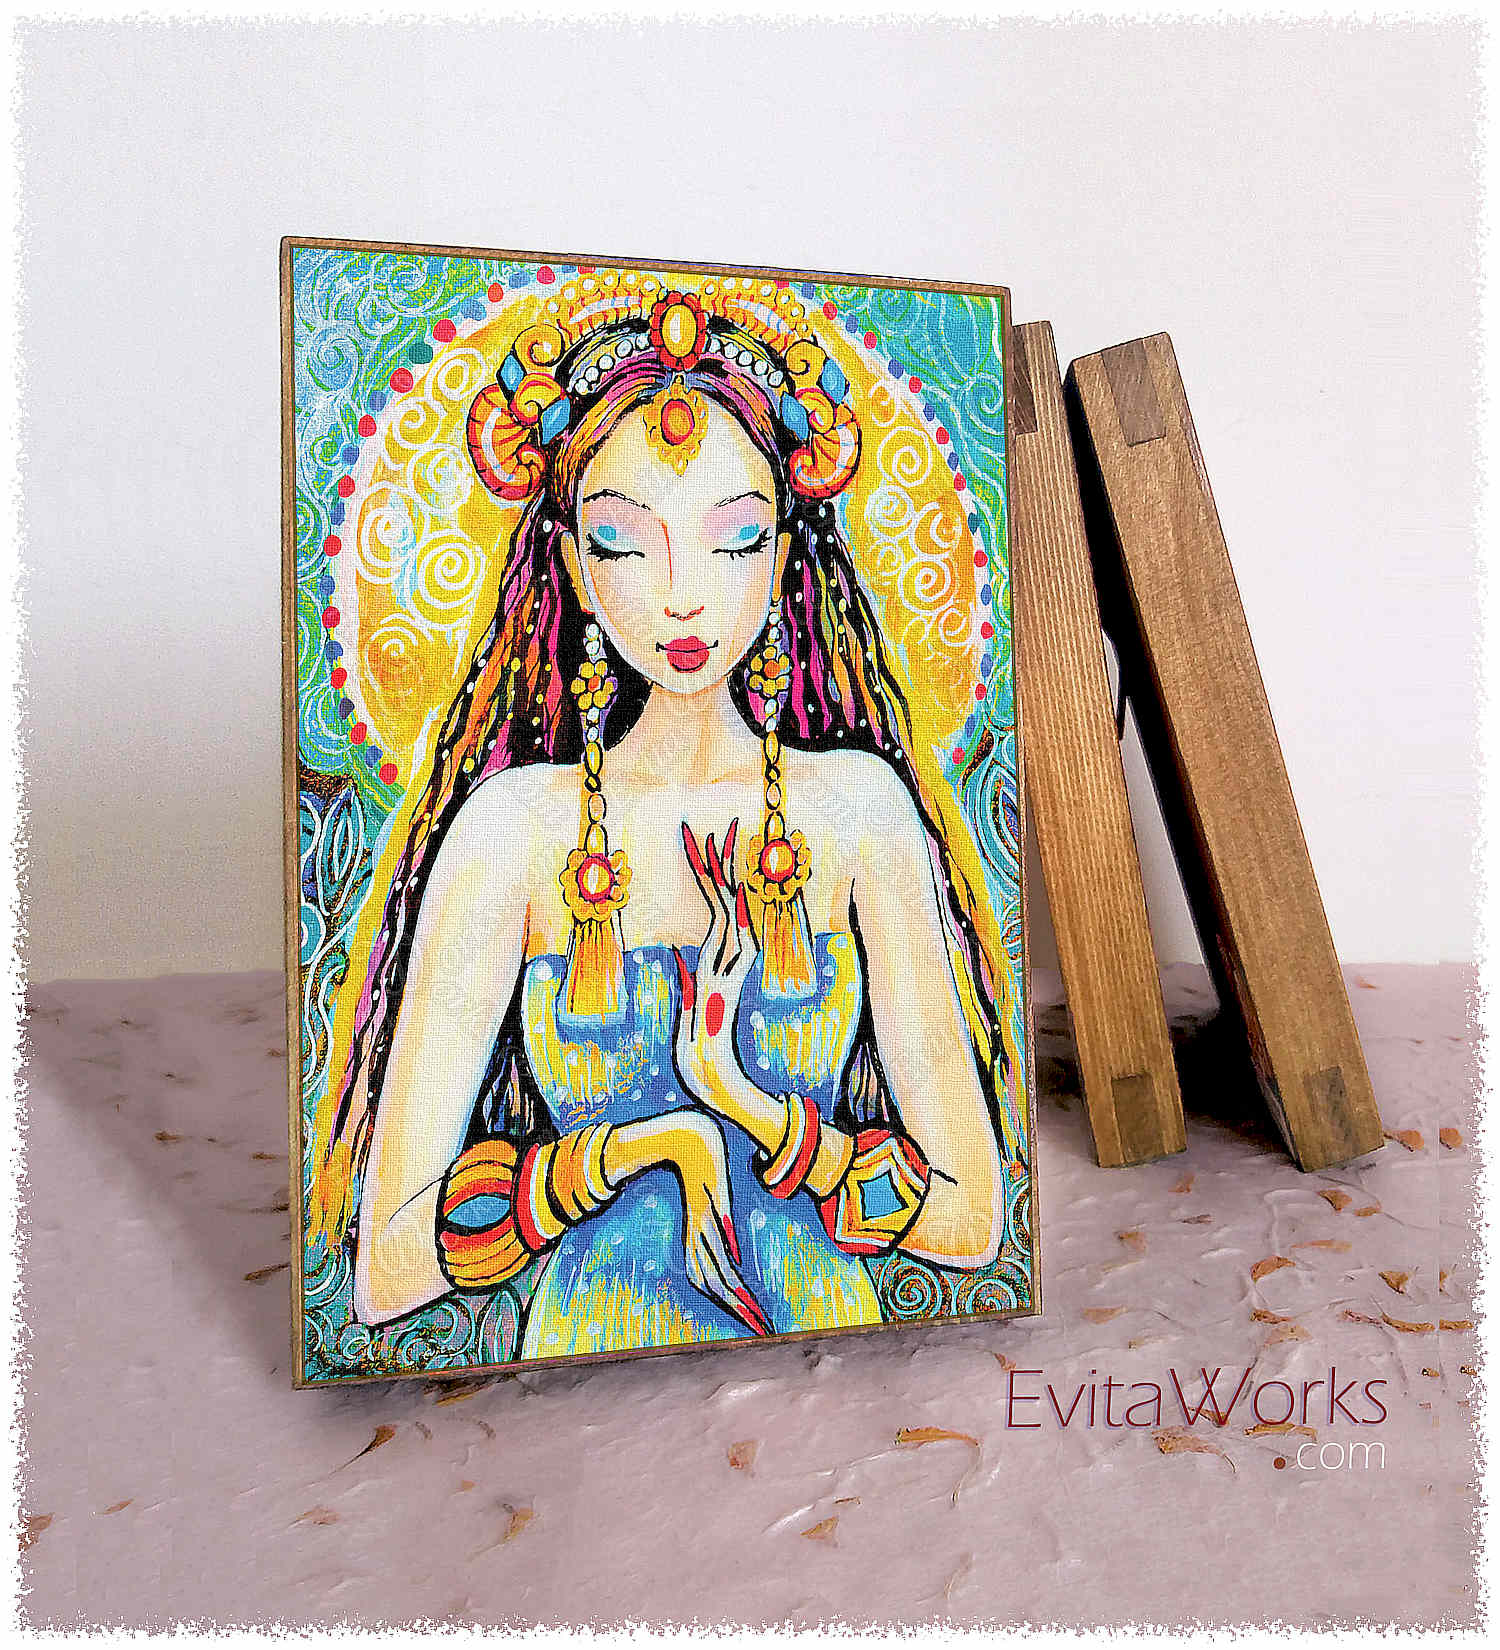 Hit to learn about "Quan Yin, Goddess of Mercy and Compassion" on woodblocks